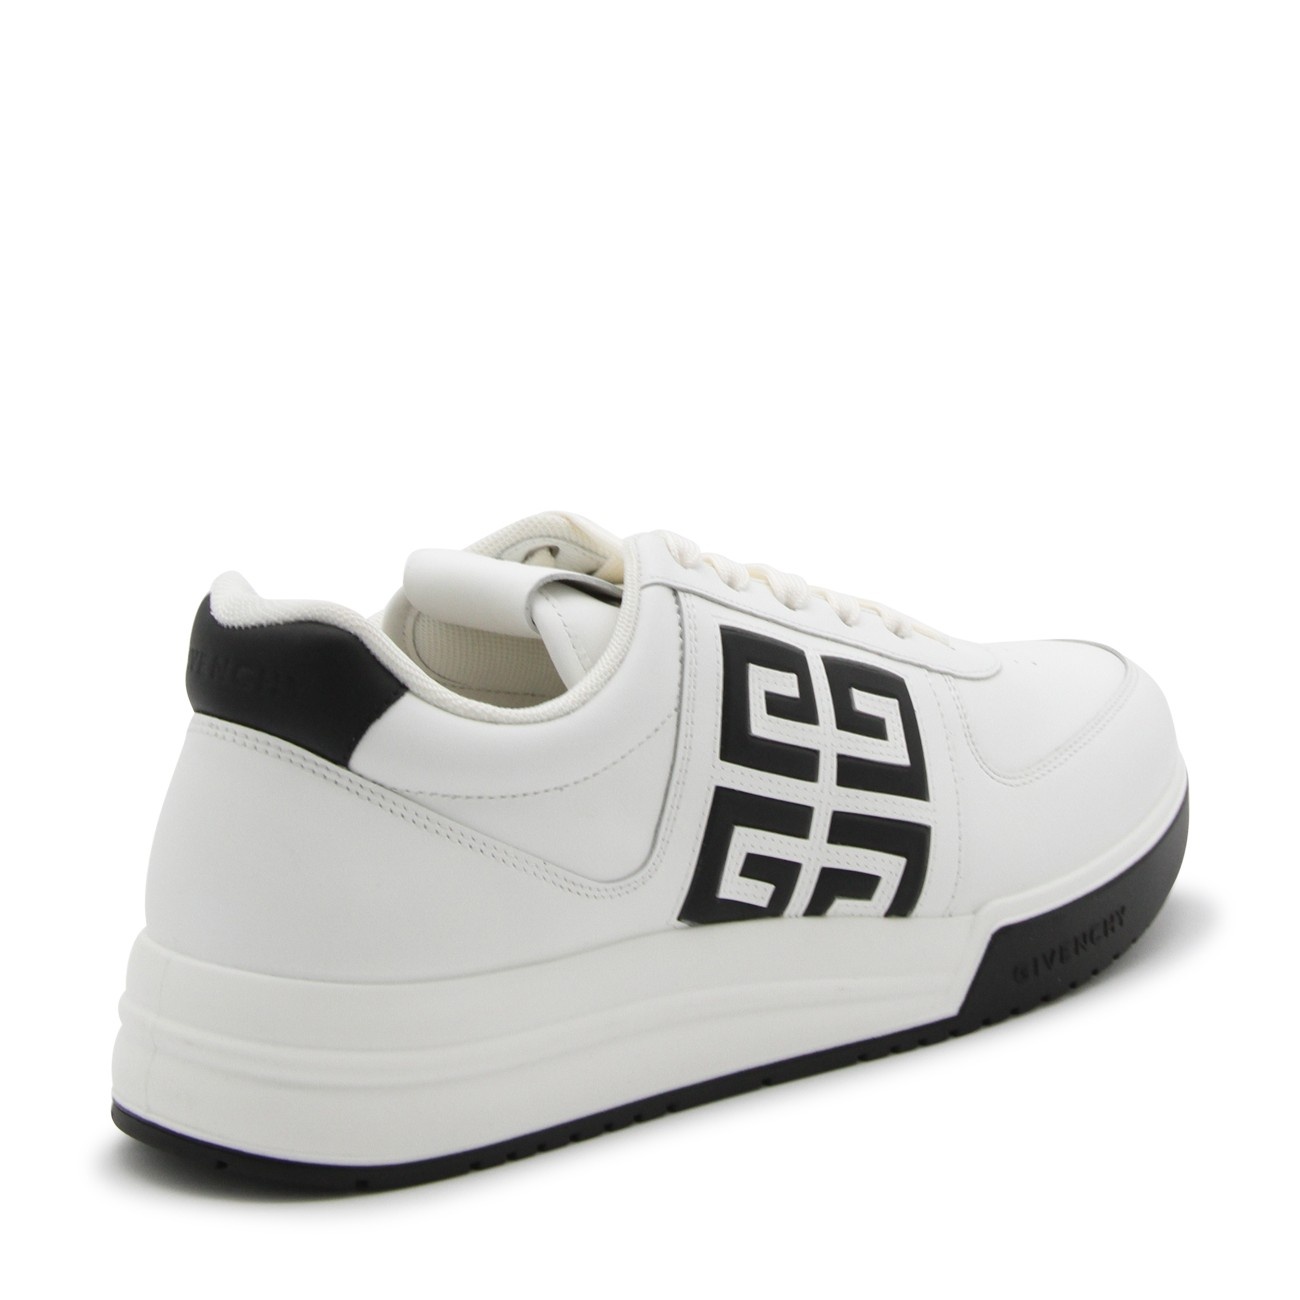 white and black leather sneakers - 3